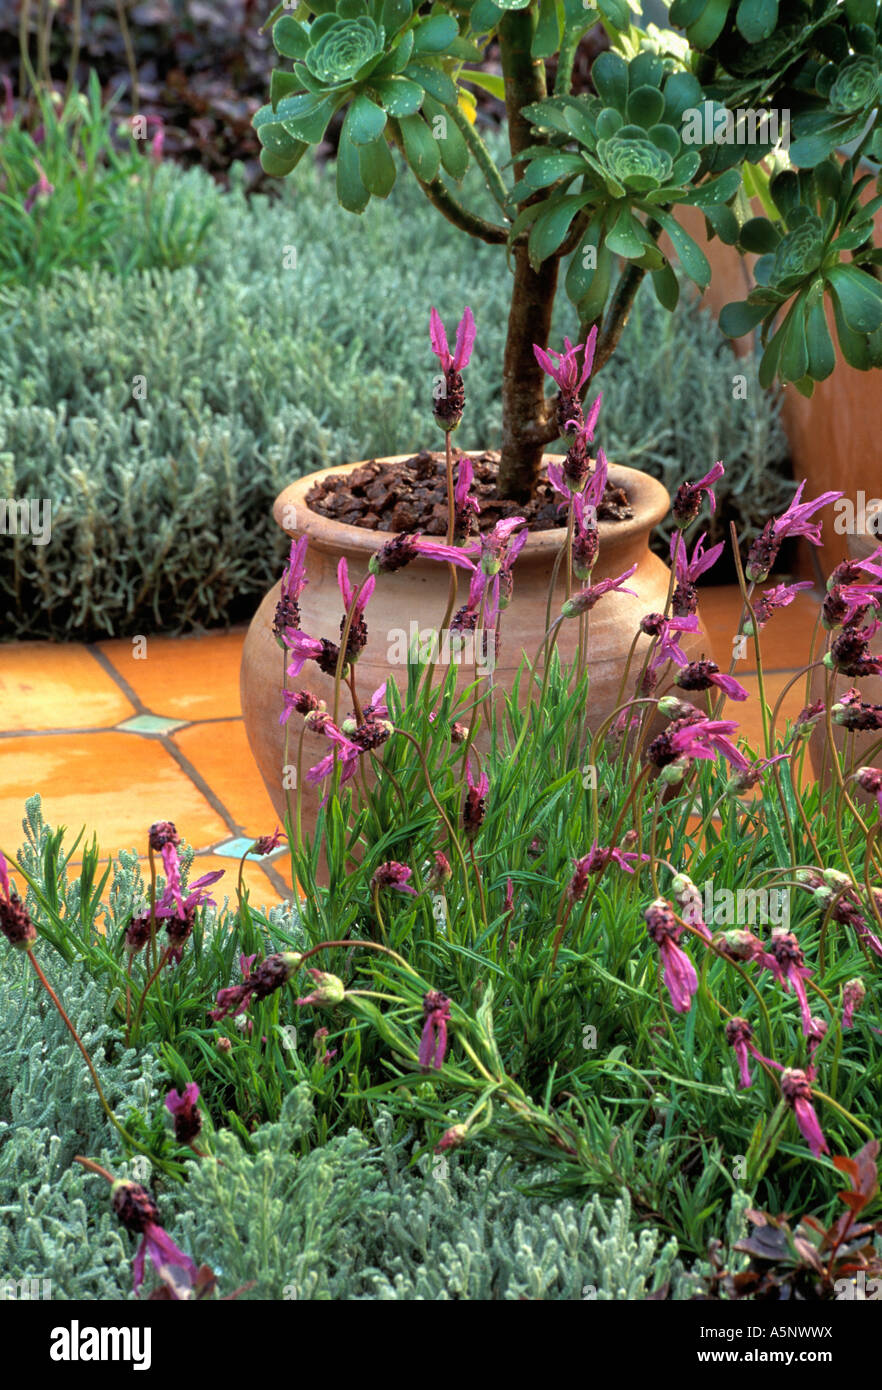 Aeonium in large terracotta pot on paving with Lavender Stoechas in border Stock Photo